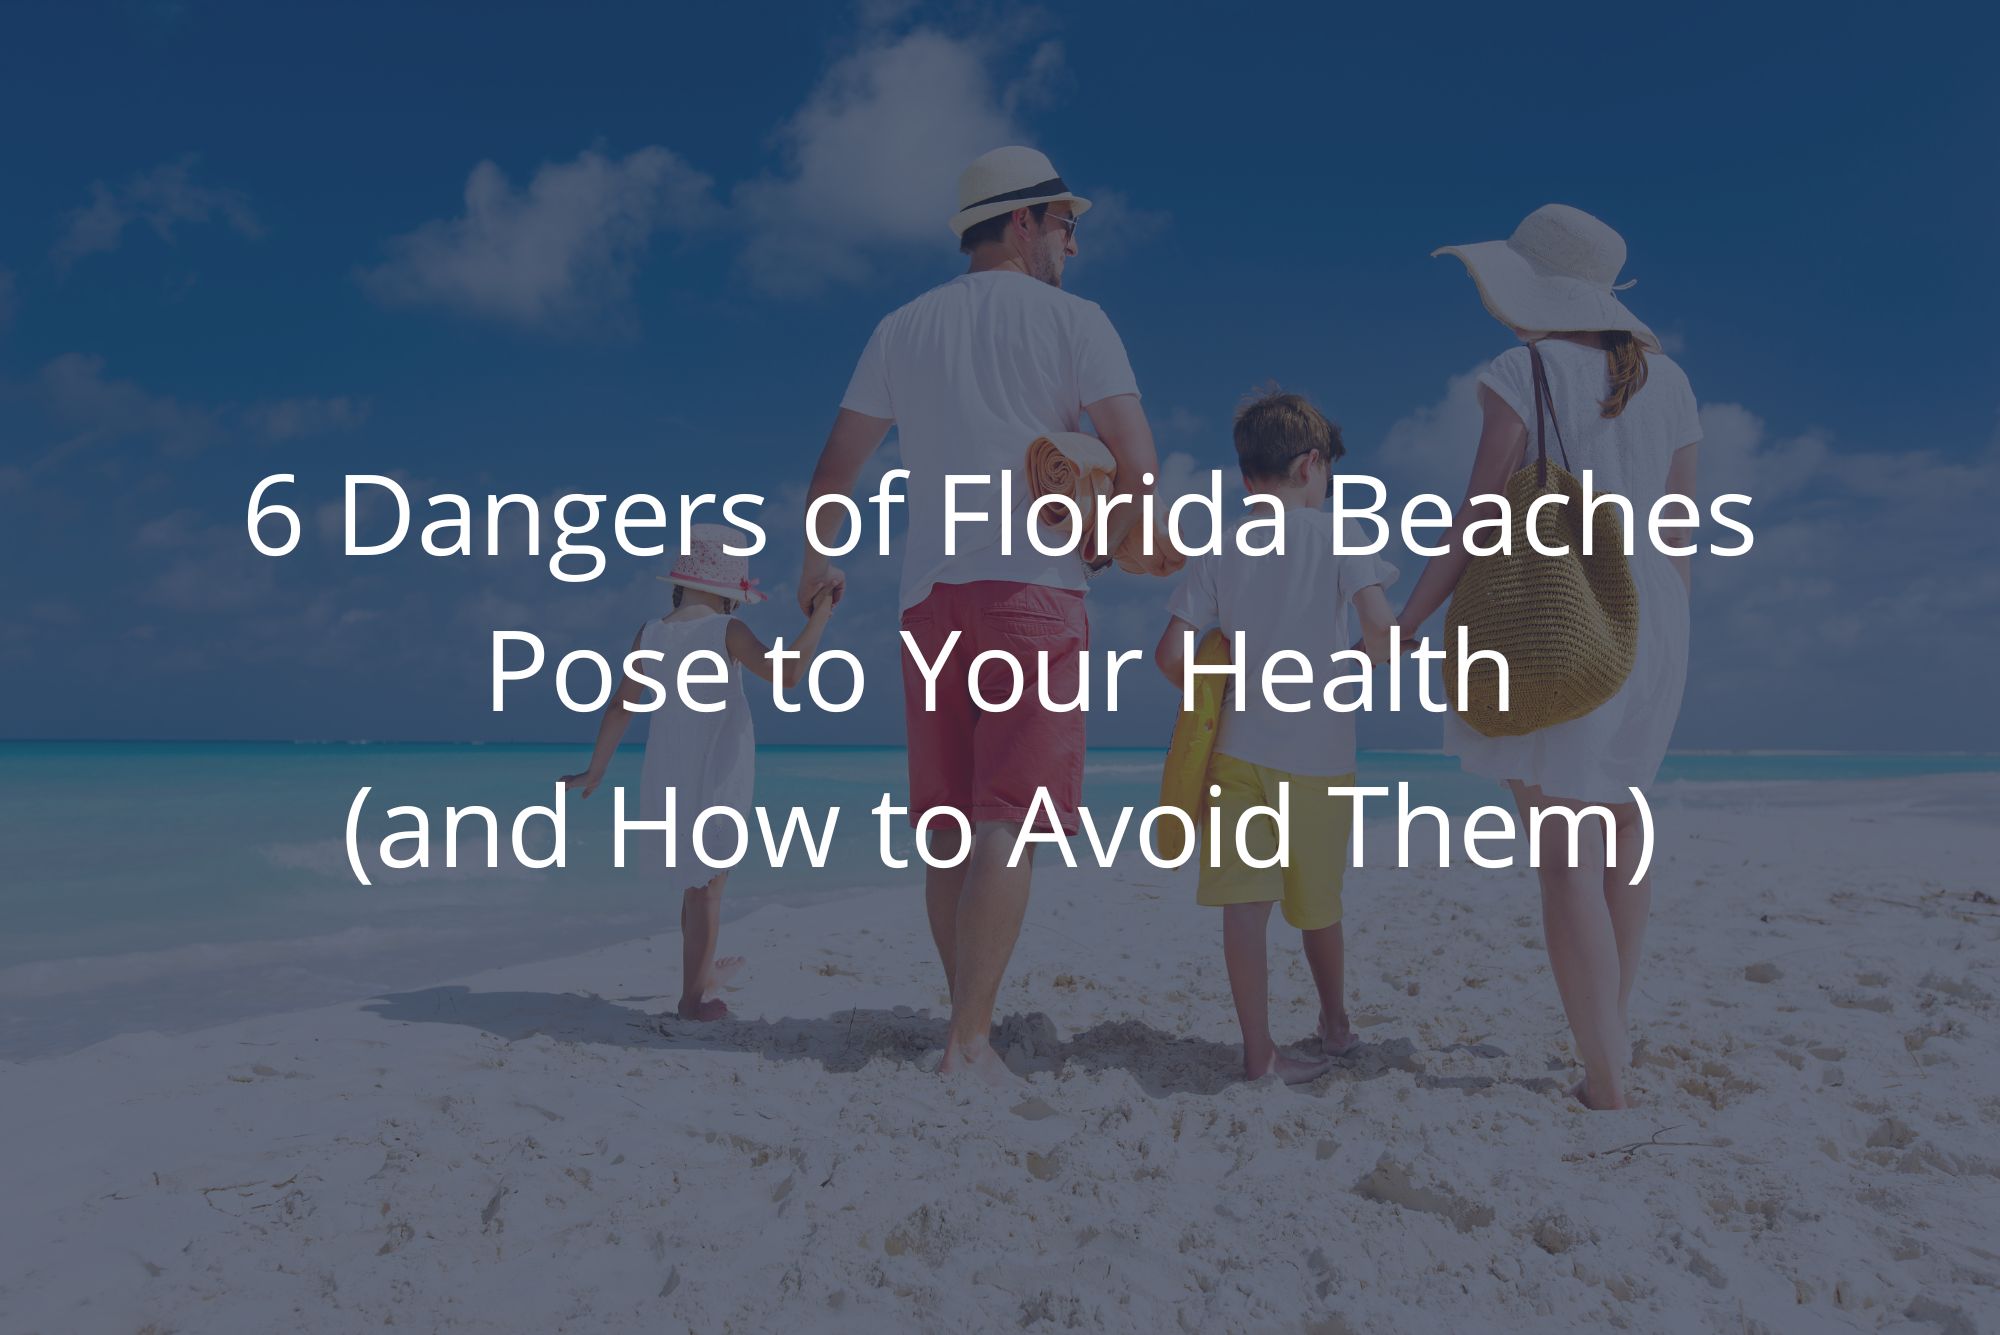 A family walks along the shoreline, unaware of the beach danger in Florida with a dark overlay.